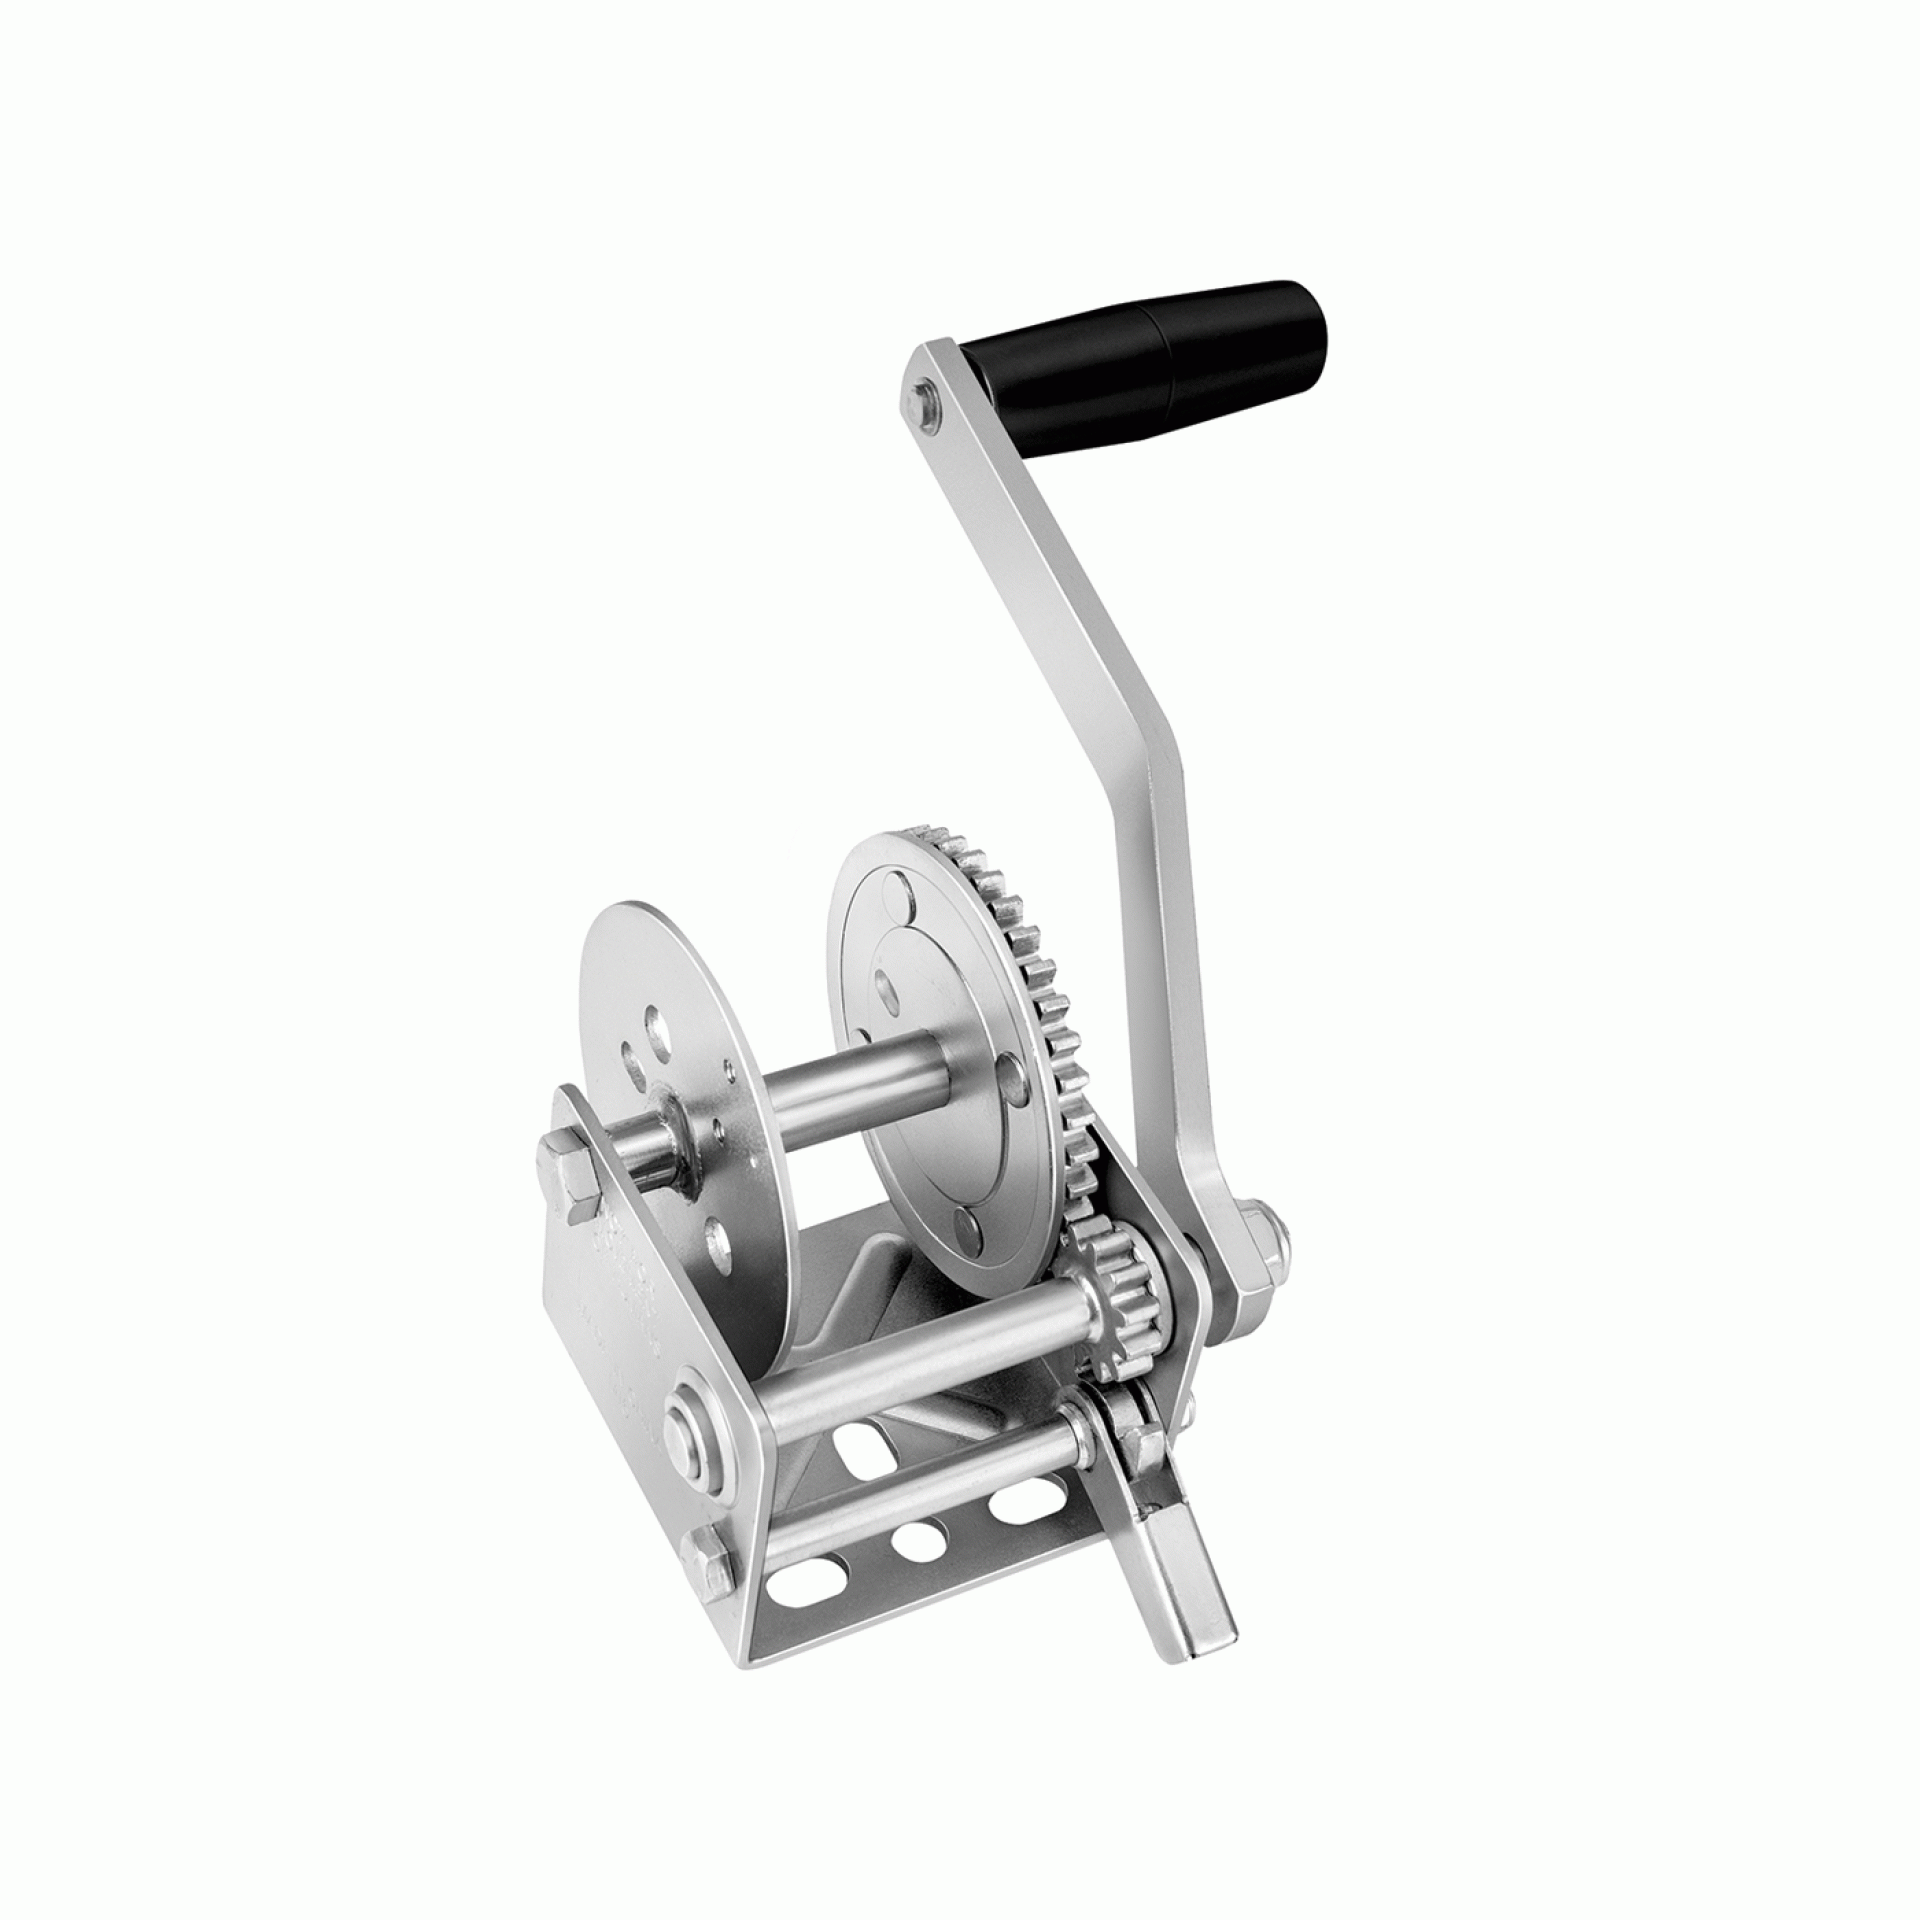 FULTON PERFORMANCE PRODUCTS | 142001 | Trailer winch 900lb single speed.